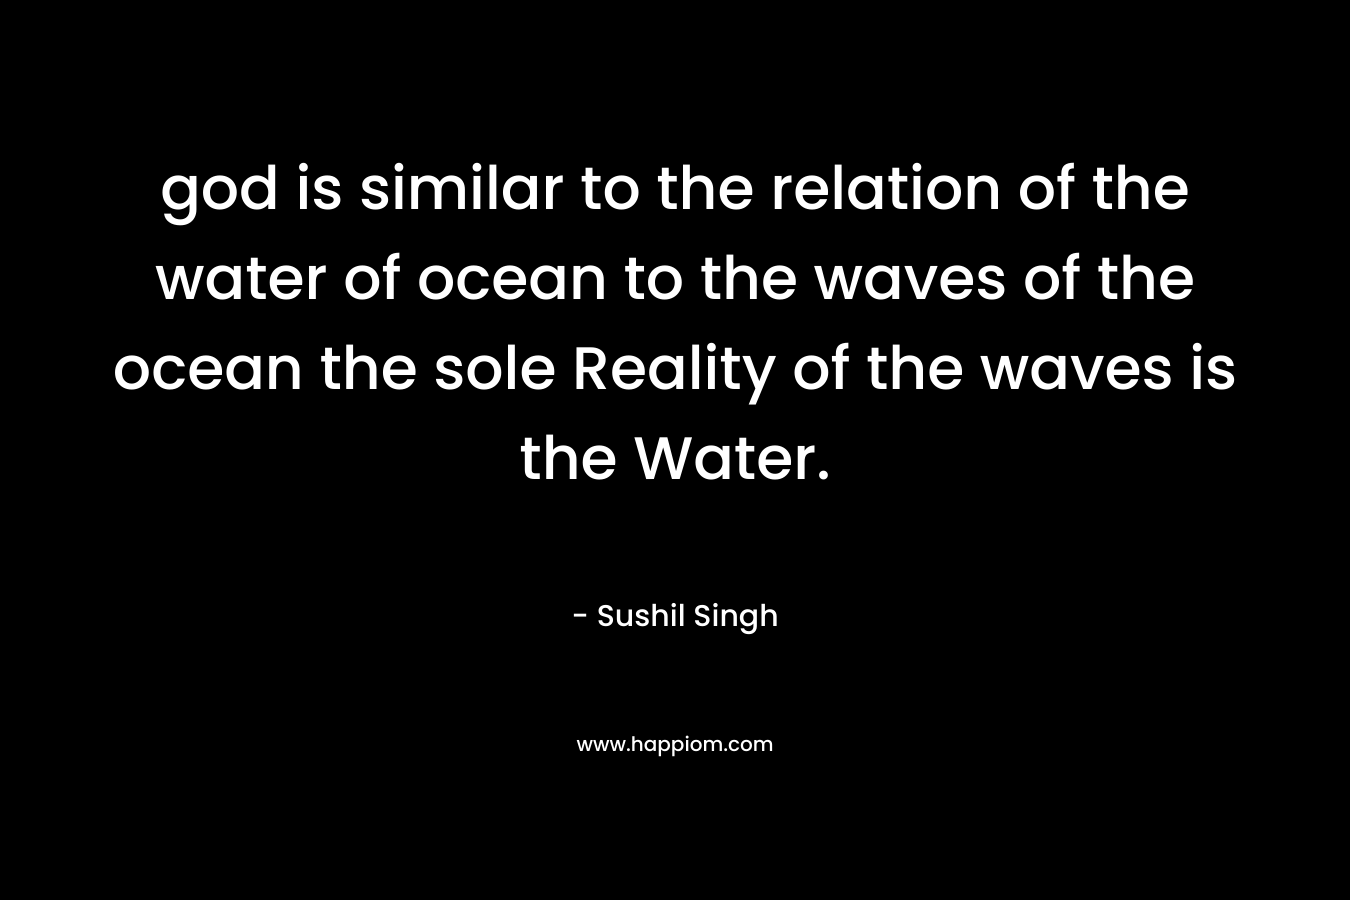 god is similar to the relation of the water of ocean to the waves of the ocean the sole Reality of the waves is the Water.